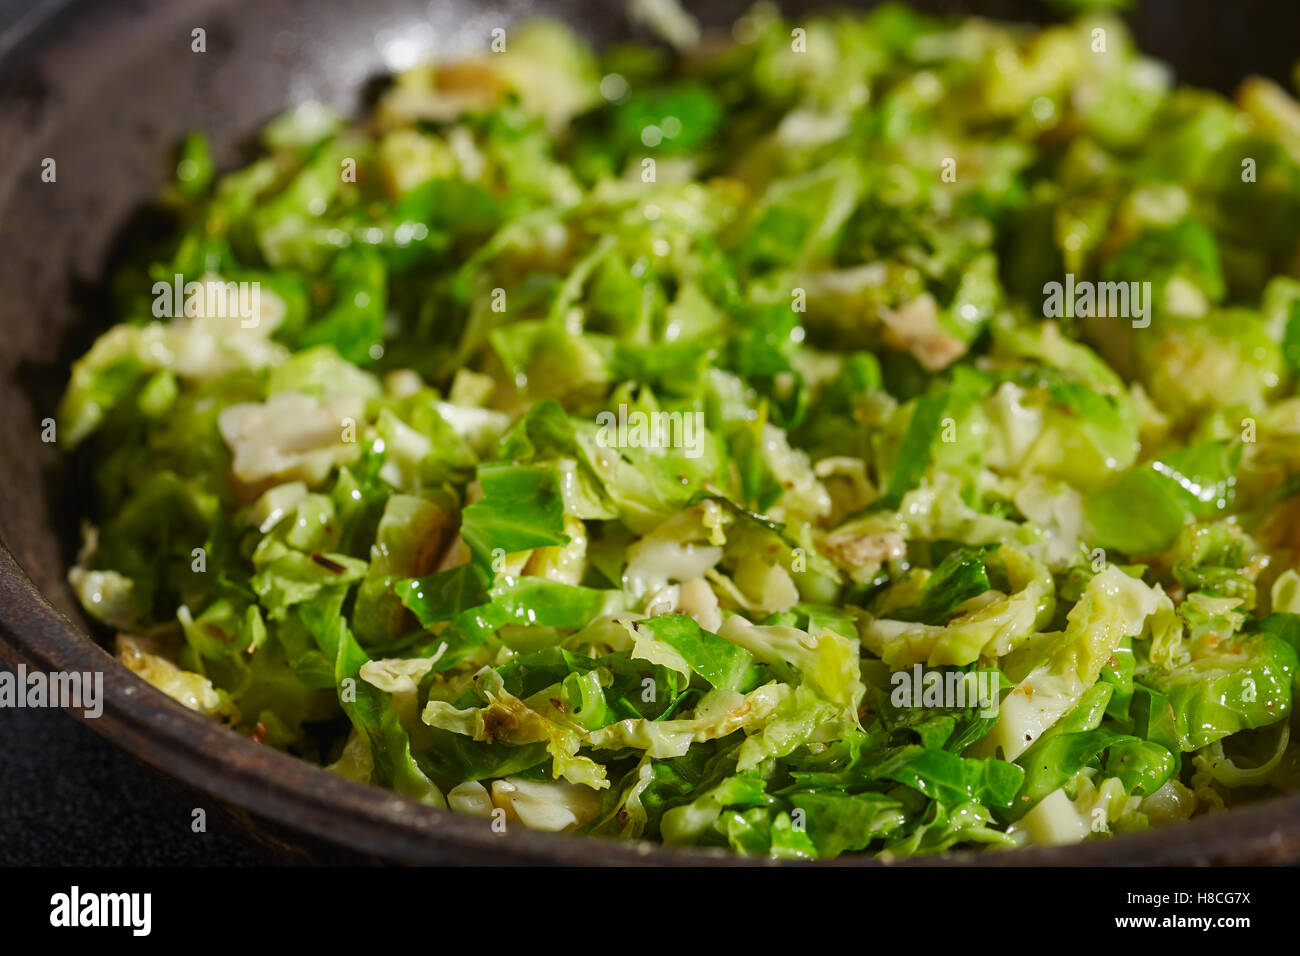 sliced brussels sprouts frying in a skillet Stock Photo